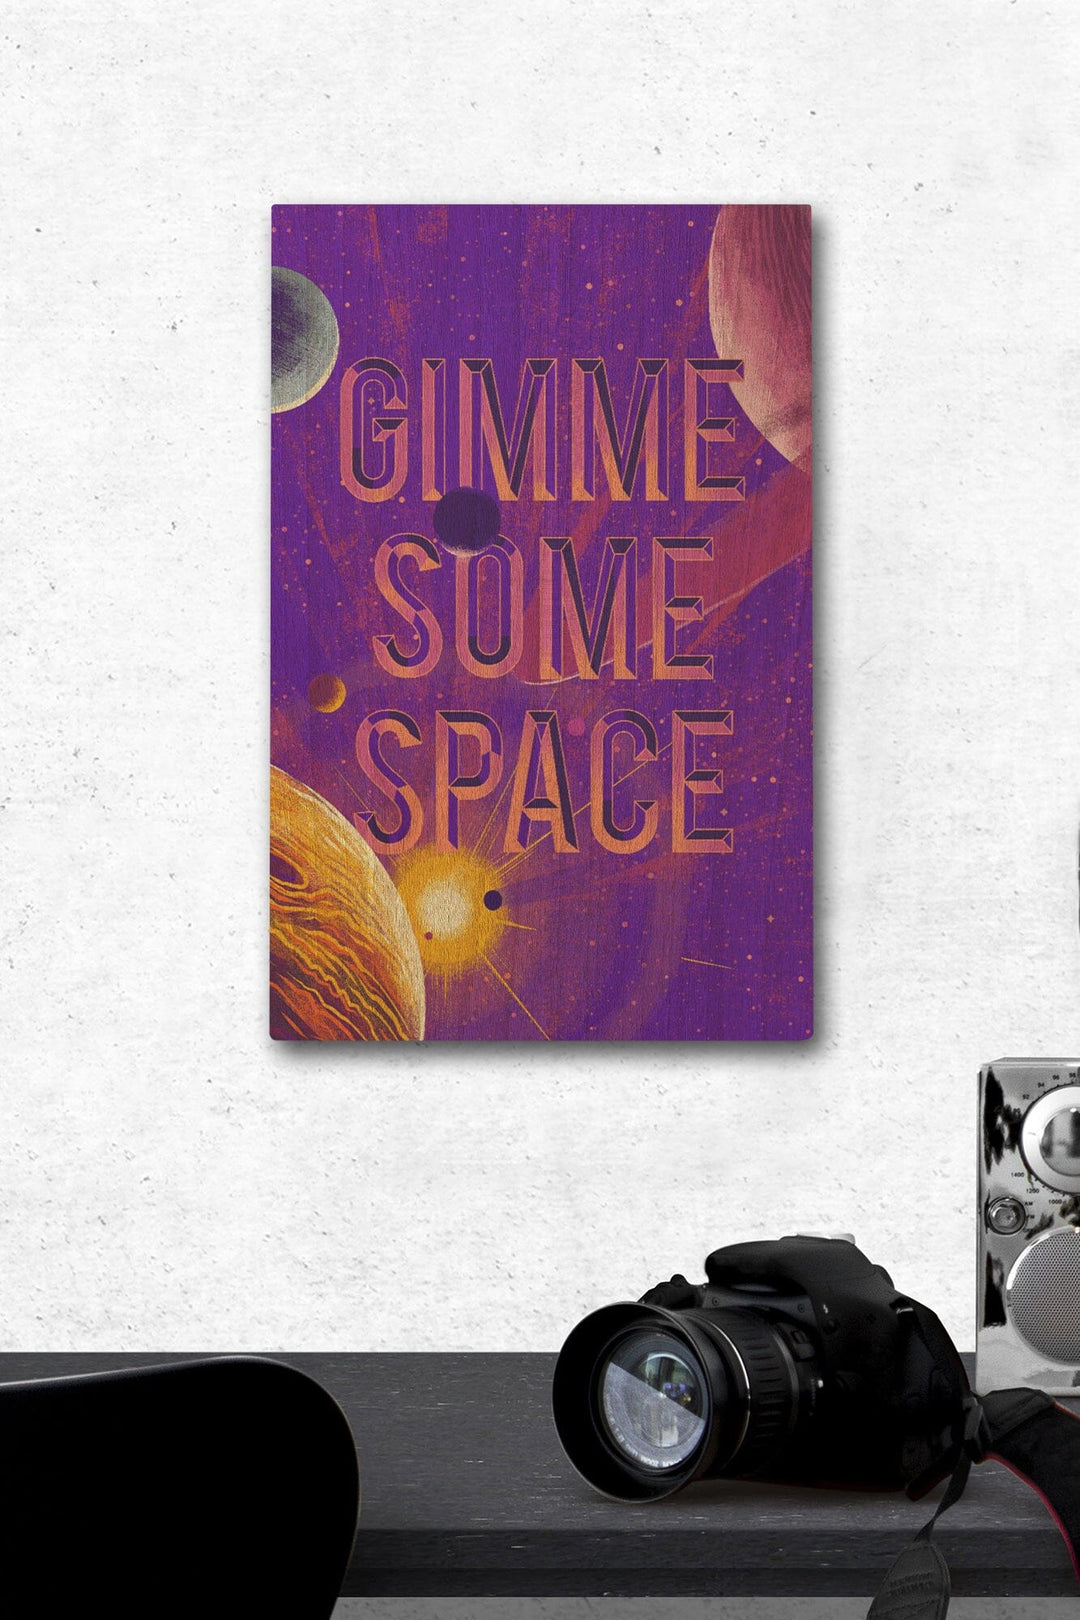 Because, Science Collection, Planets, Solar System, Gimme Some Space, Wood Signs and Postcards Wood Lantern Press 12 x 18 Wood Gallery Print 